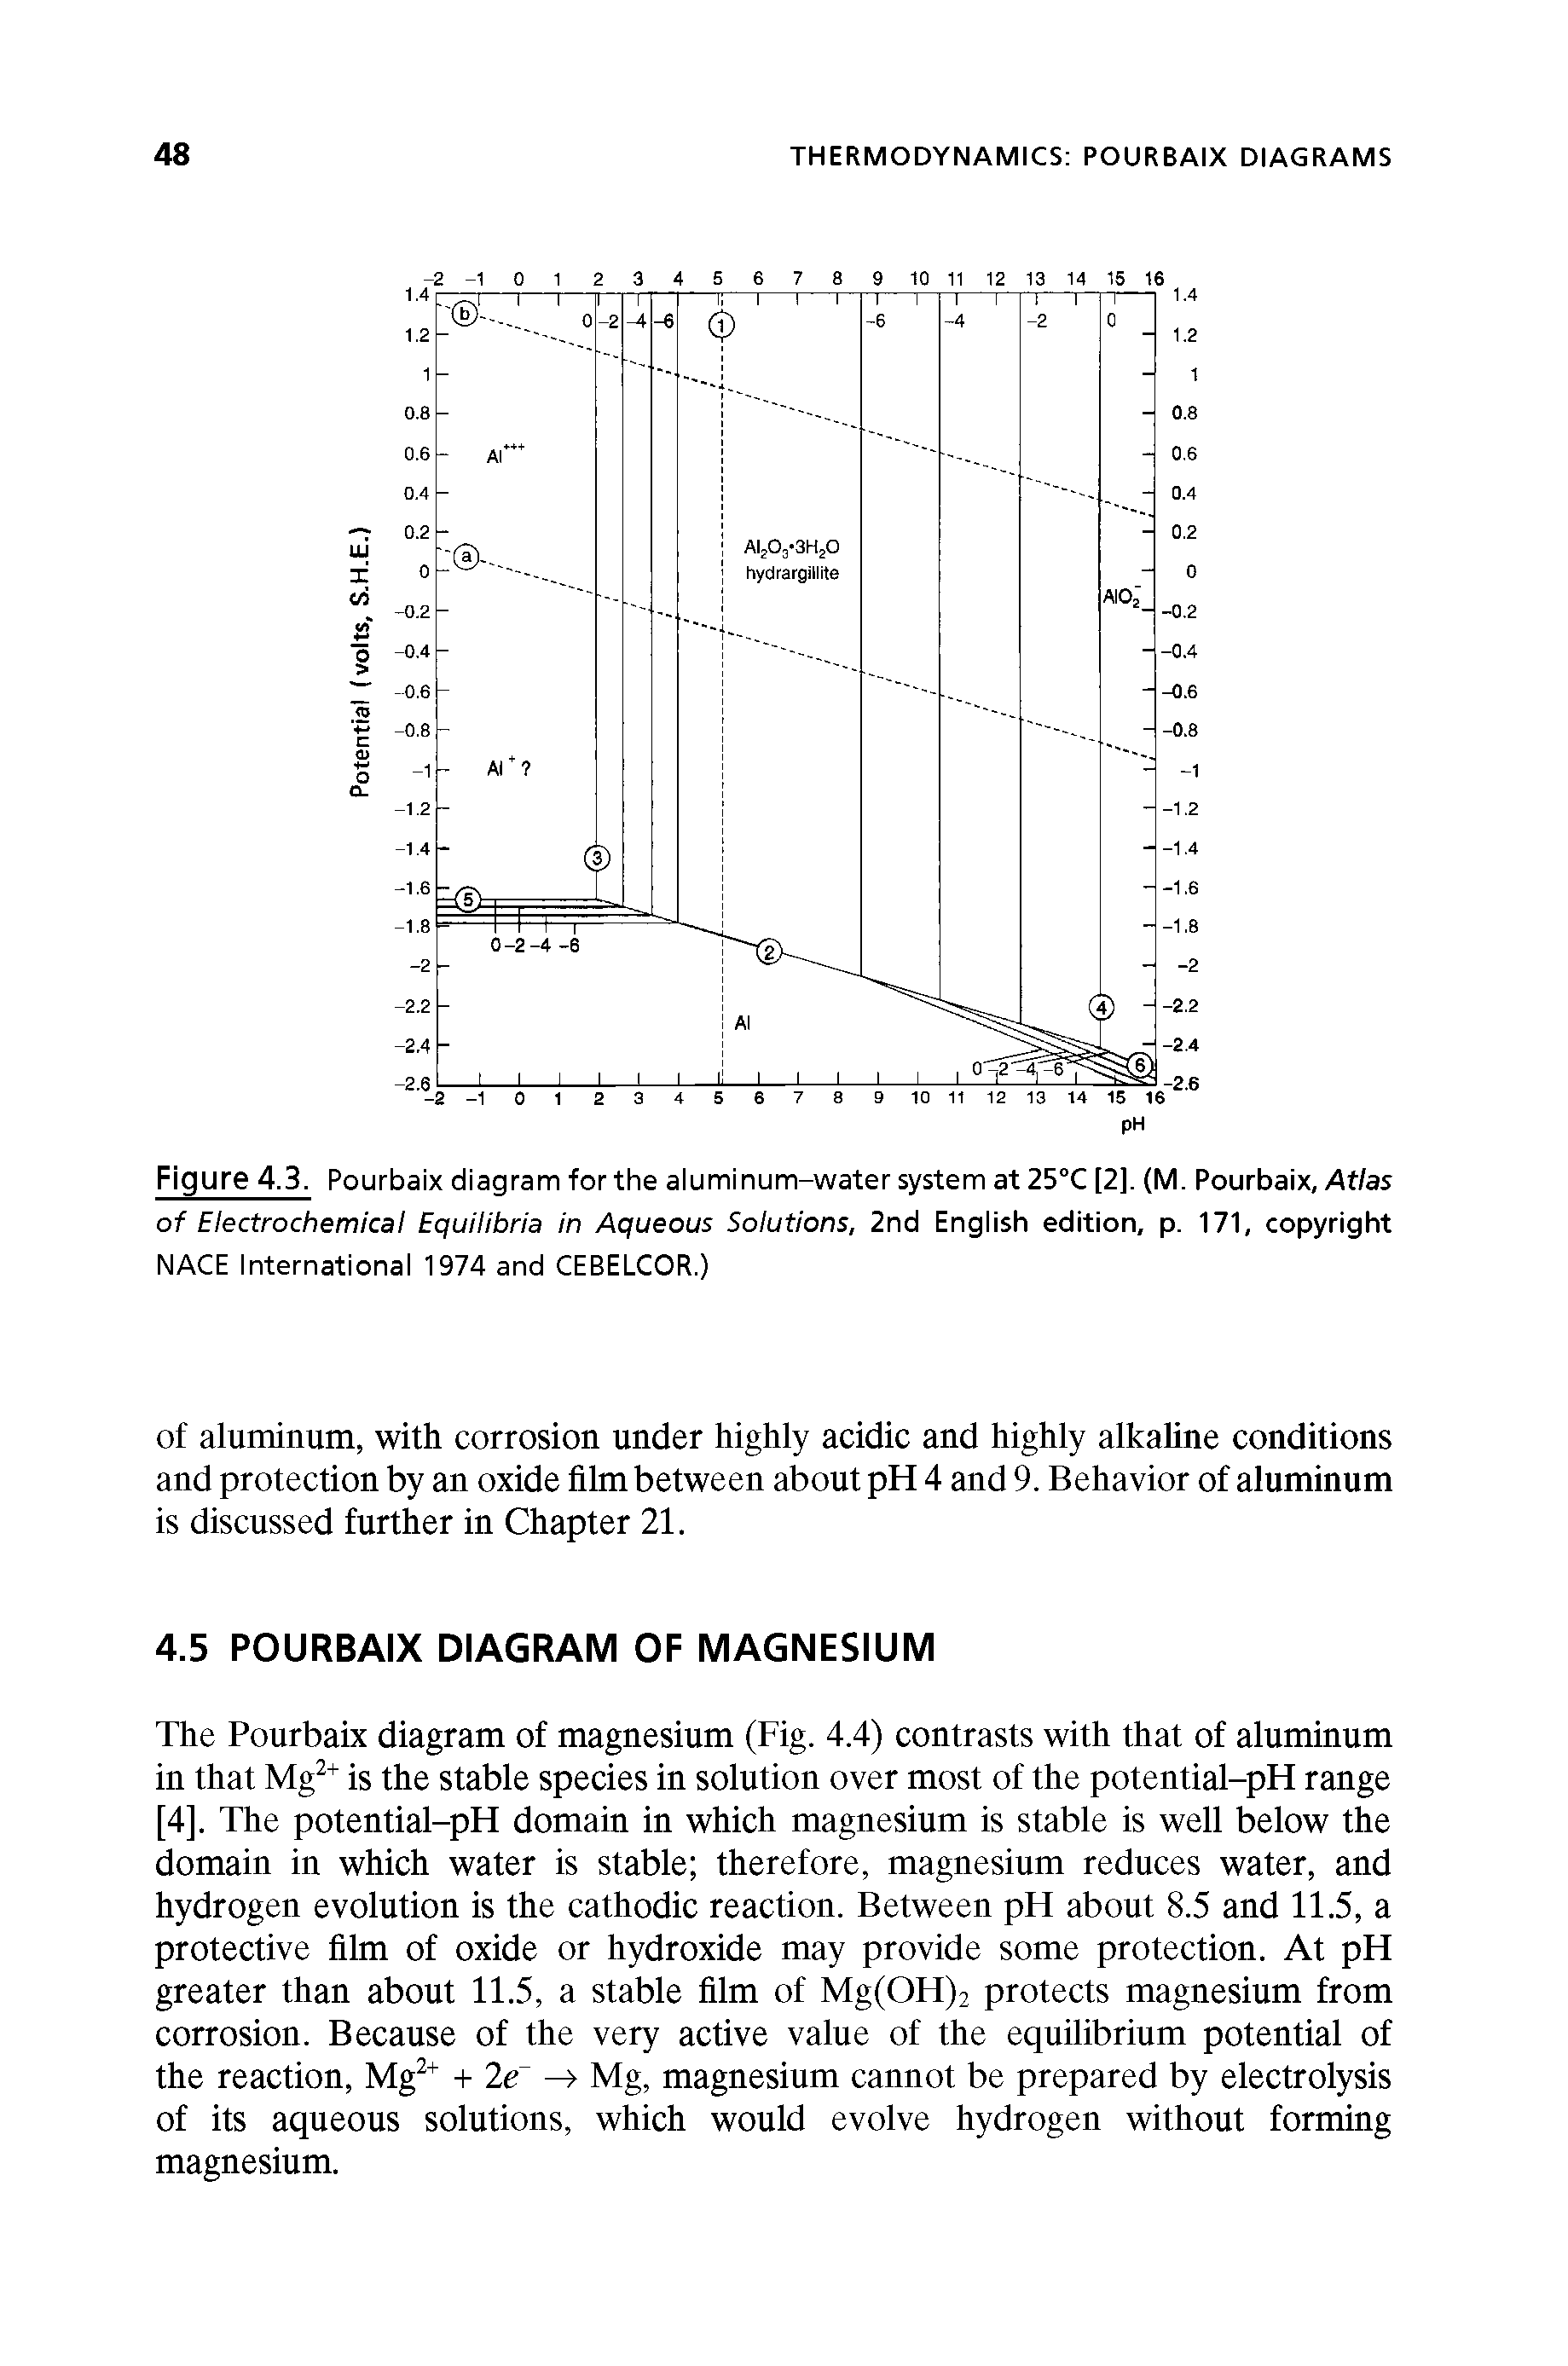 Figure 4.3. Pourbaix diagram for the aluminum-water system at 25°C [2]. (M. Pourbaix, Atlas of Electrochemical Equilibria in Aqueous Solutions, 2nd English edition, p. 171, copyright NACE International 1974 and CEBELCOR.)...